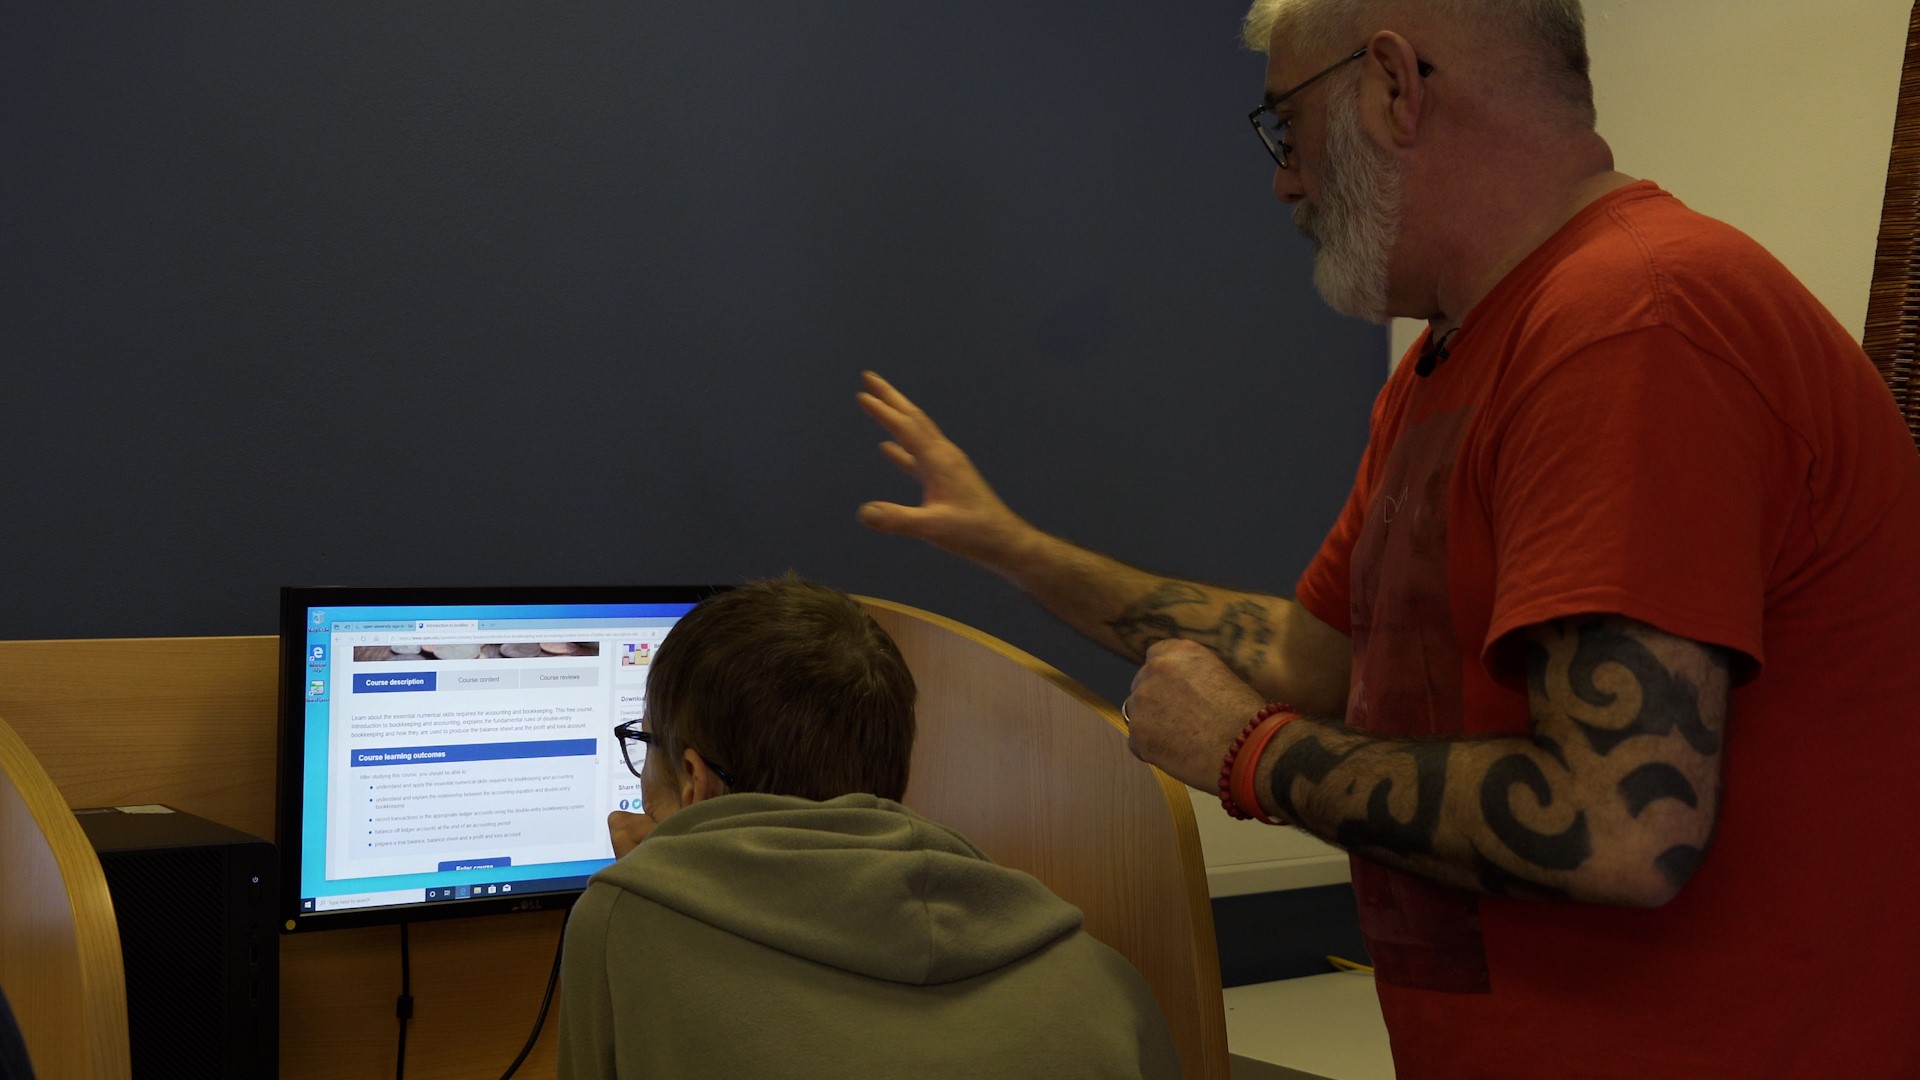 Tony collins-moore standing behind a seated carer, both are looking at a computer screen. 